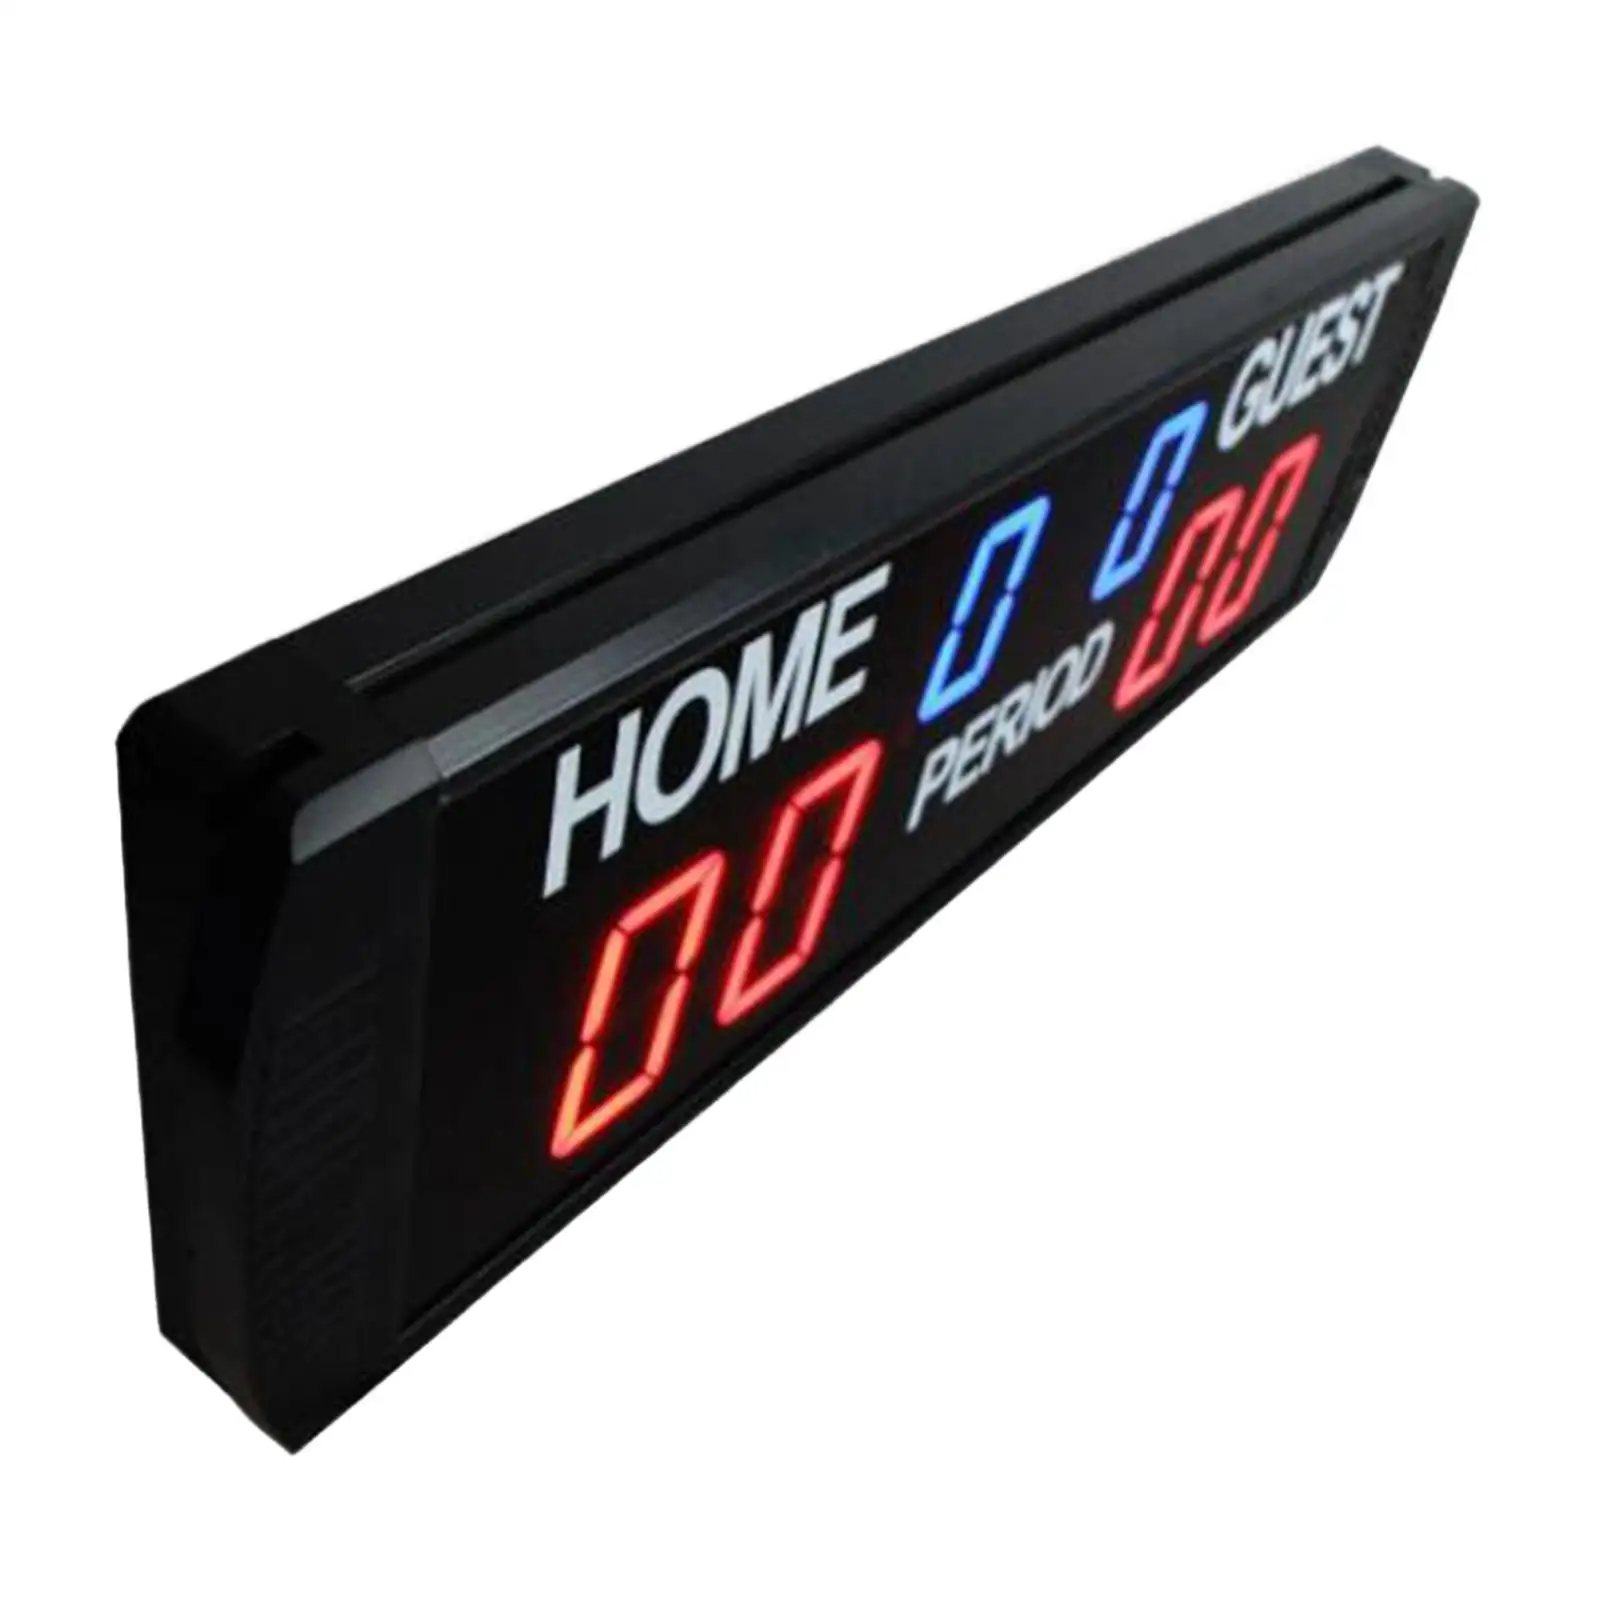 Portable Scoreboard Clock Electronic Wall Hanging LED for Games Volleyball Badminton